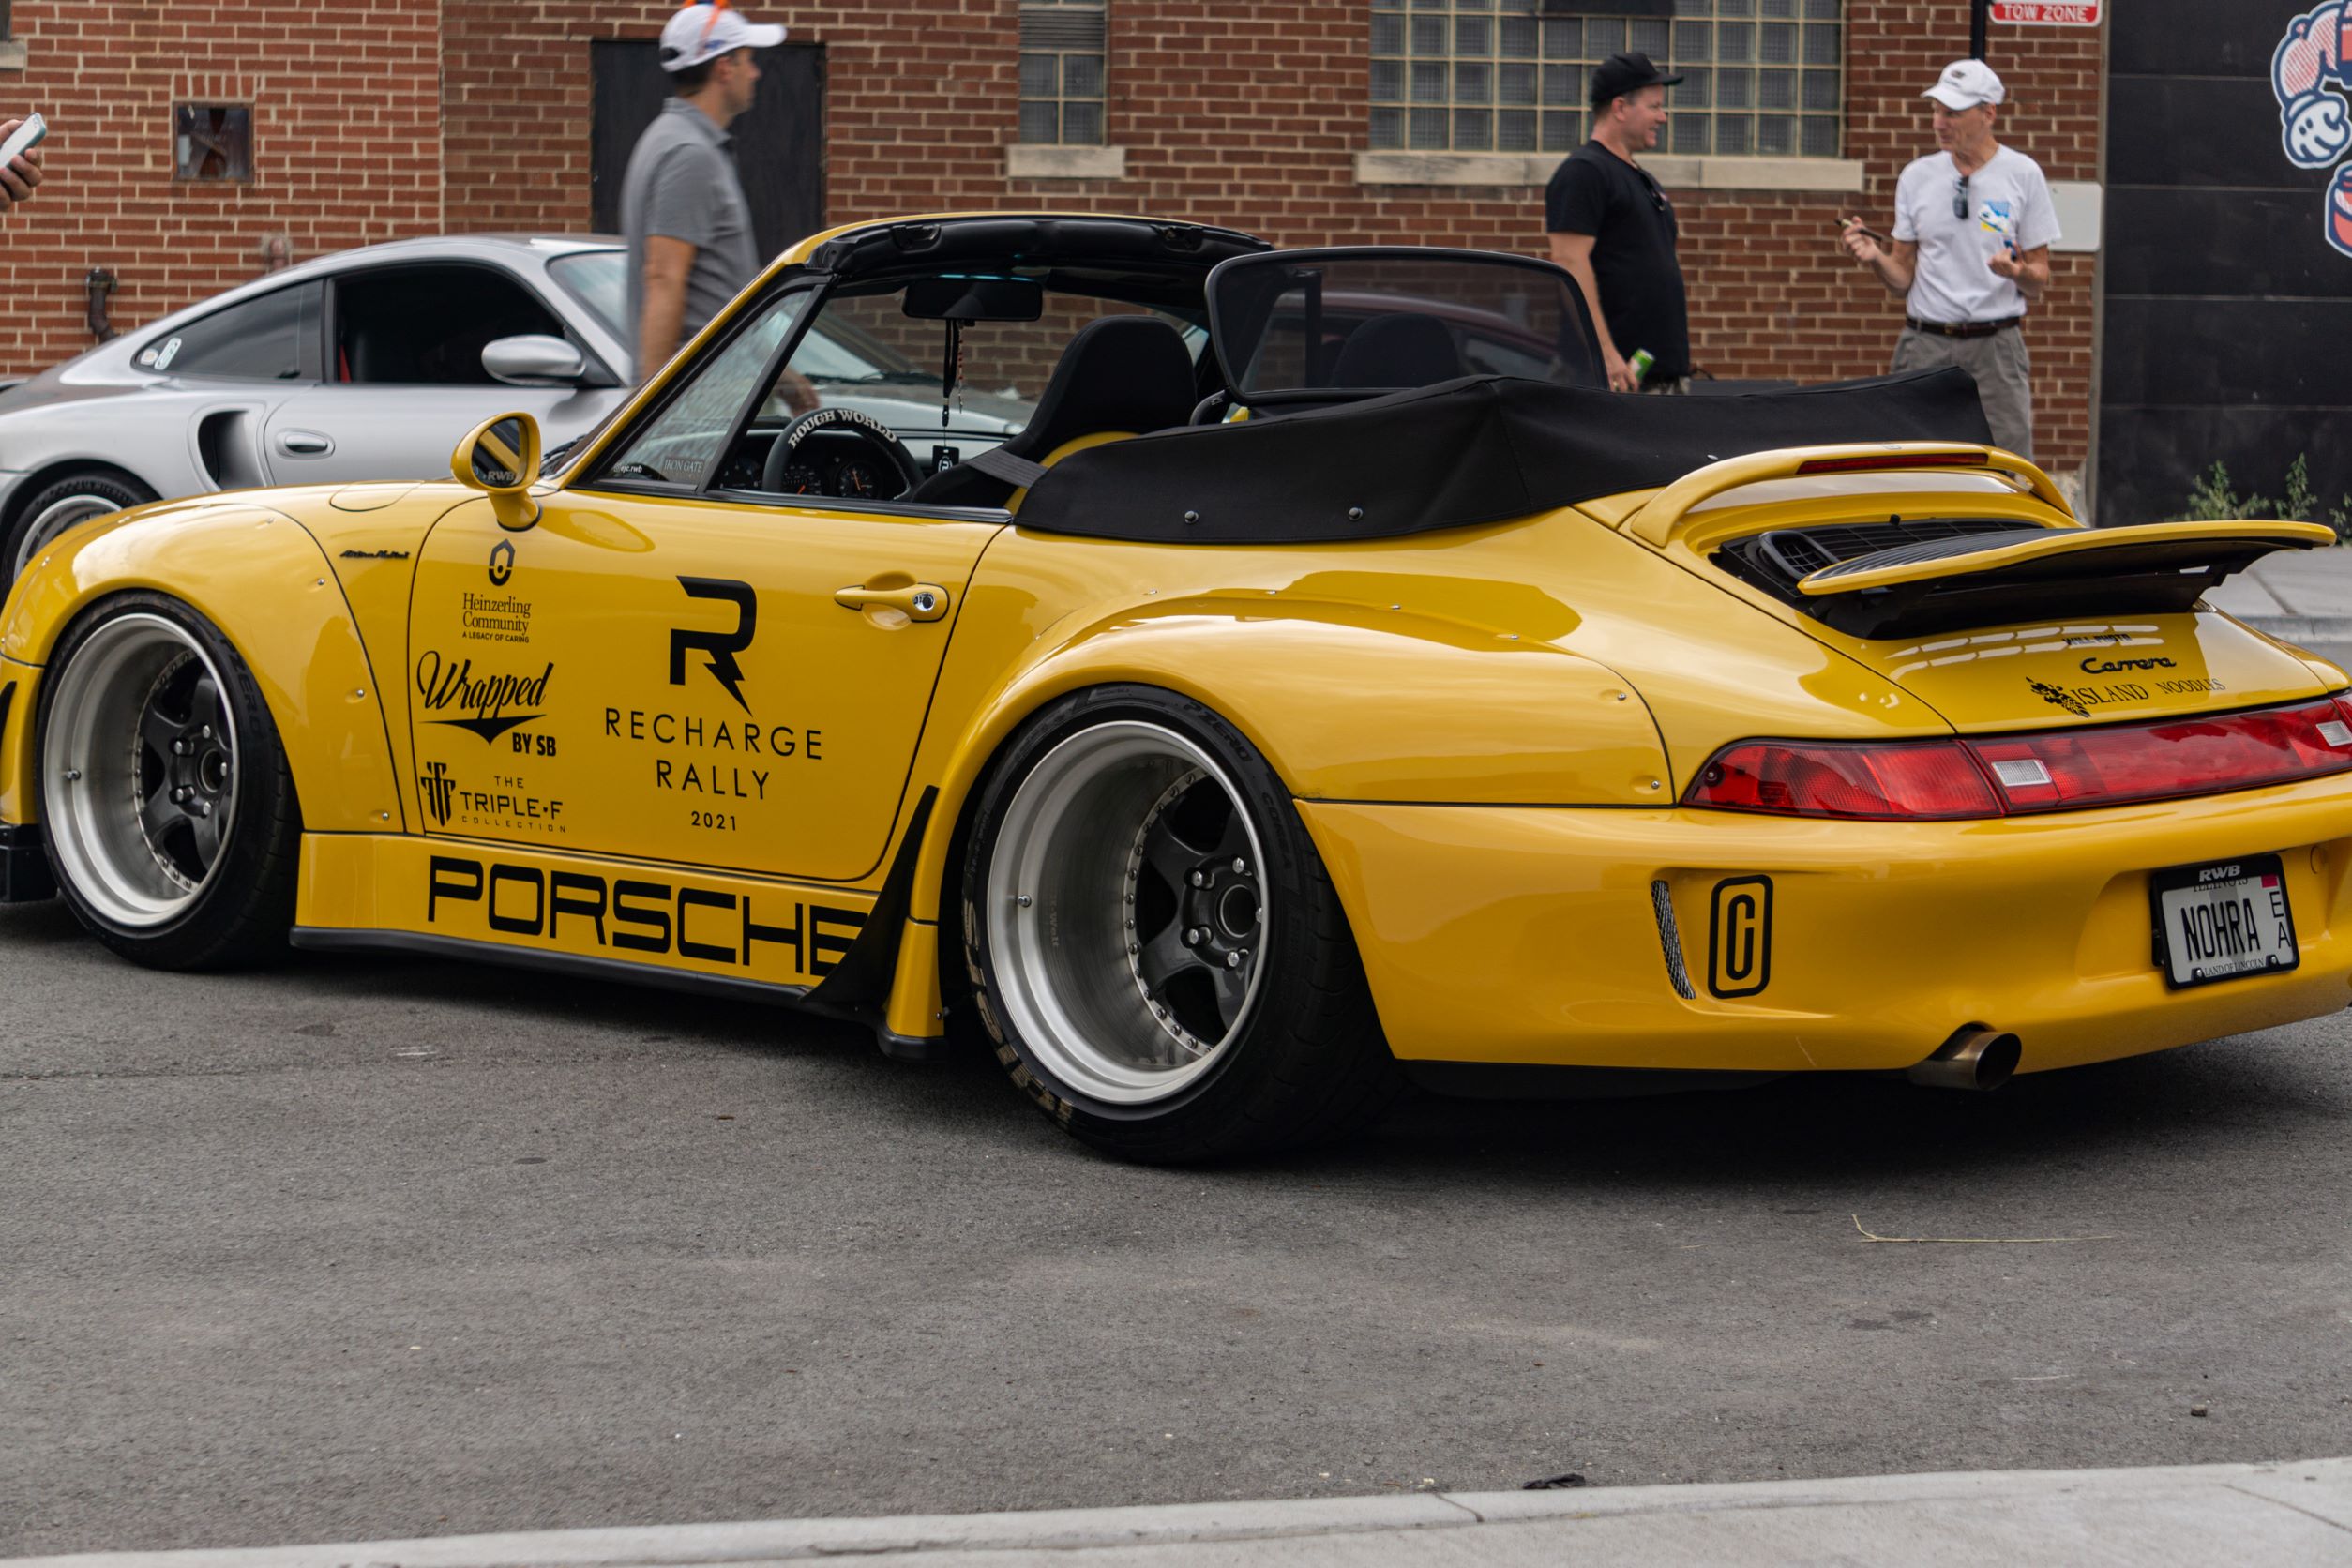 The side 3/4 view of the yellow-and-black RWB Porsche 993 911 Cabriolet 'Nohra'